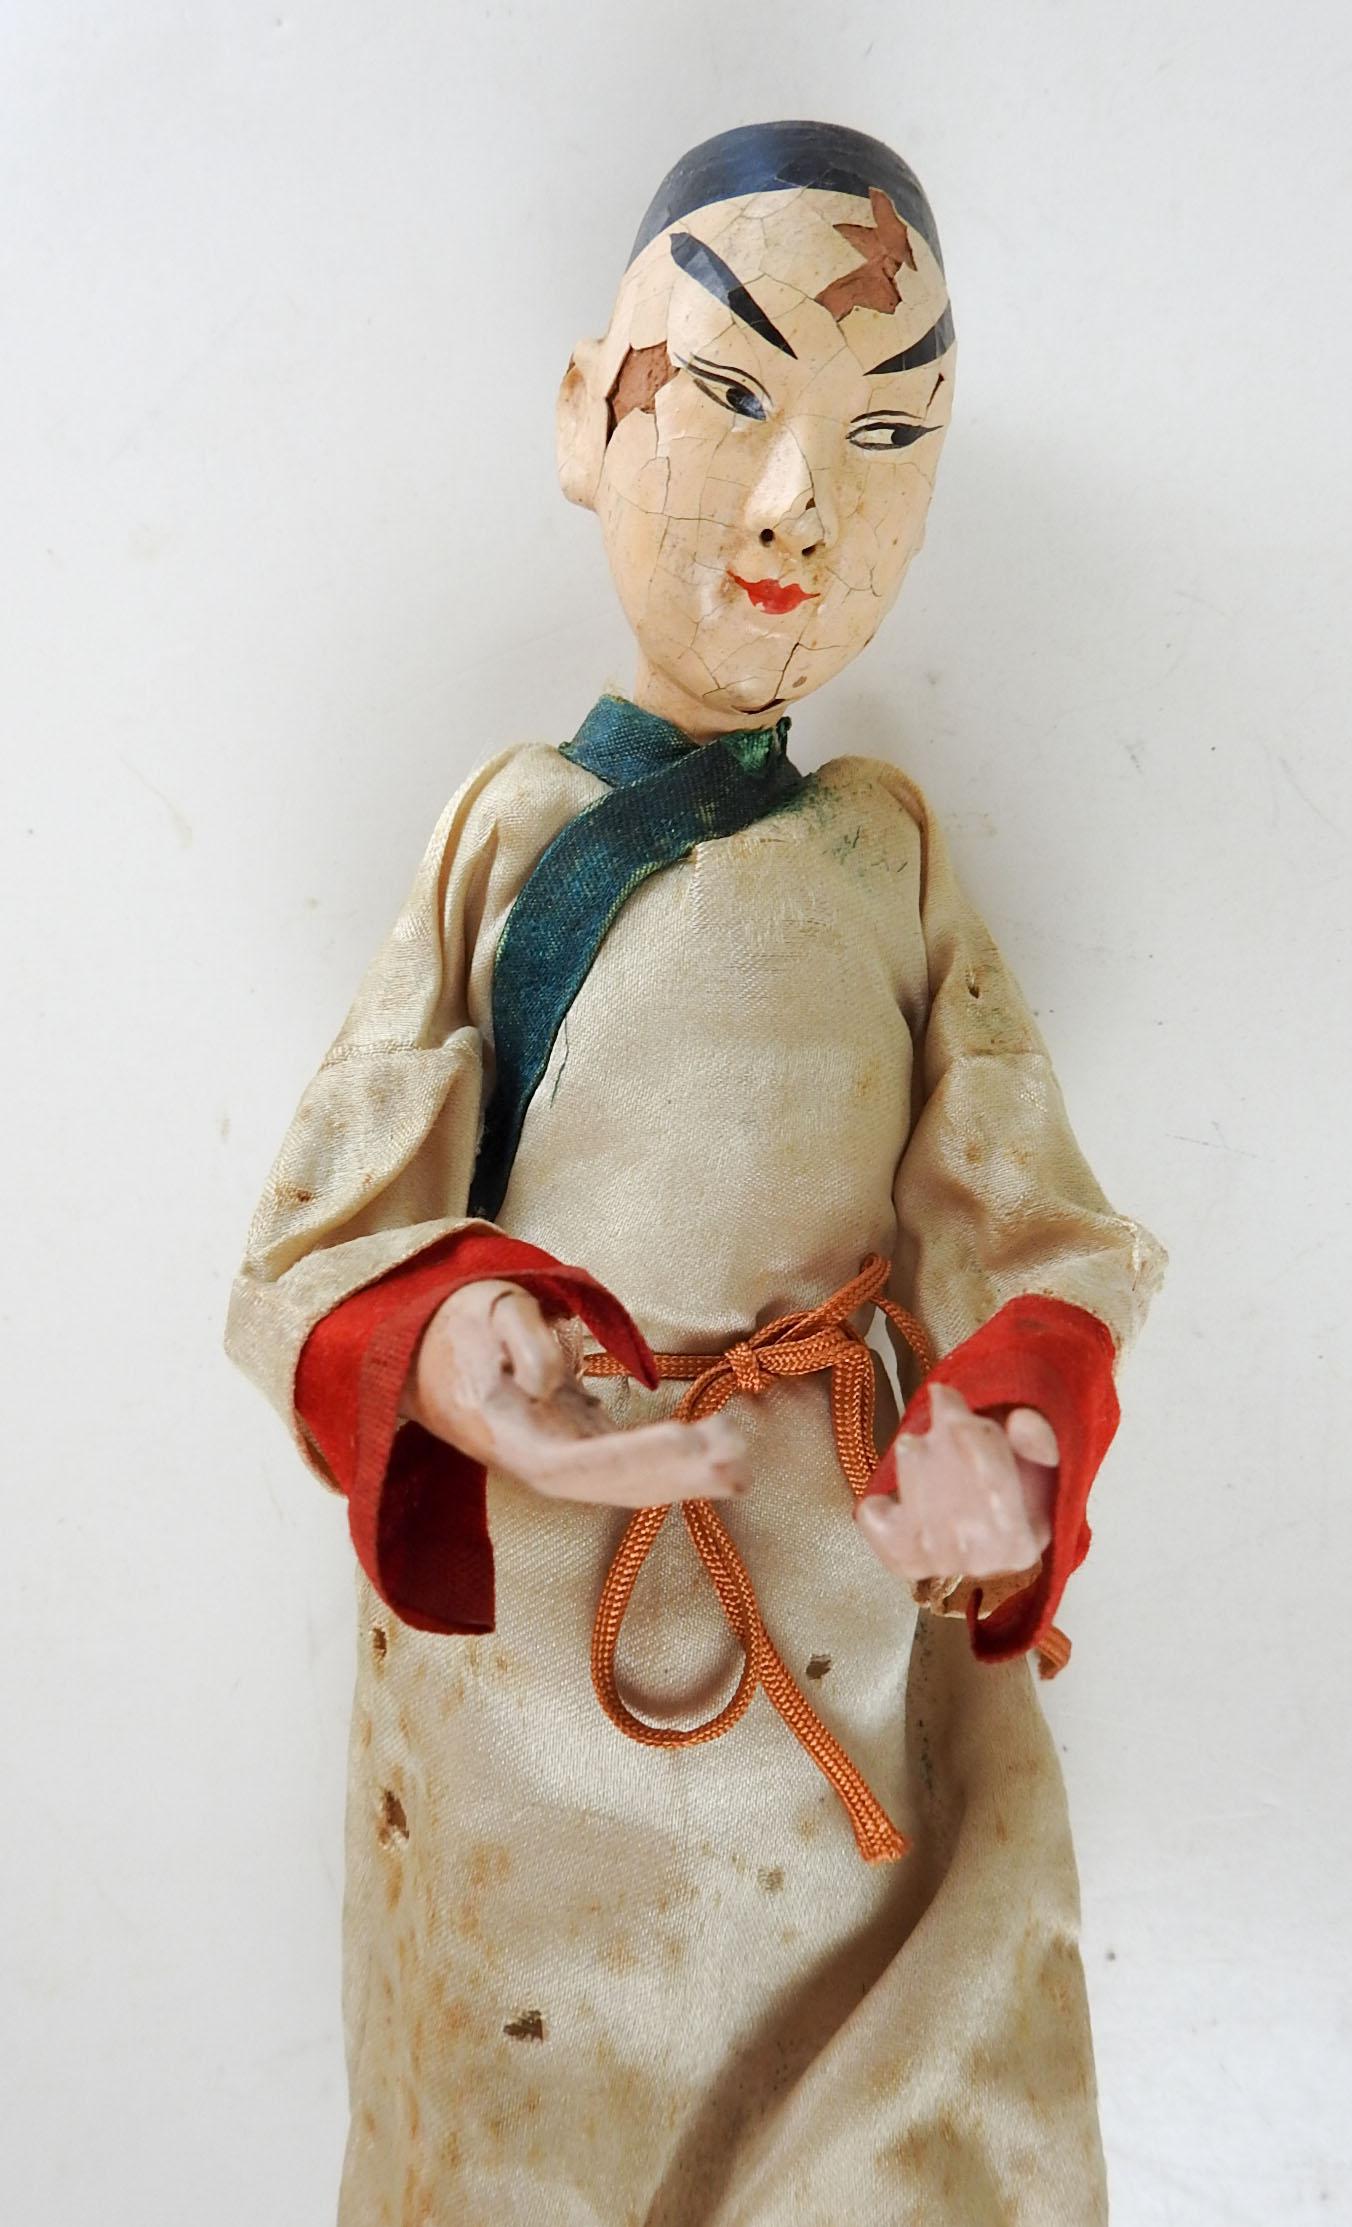 Antique Chinese opera doll. Plain silk robe, wire stand attached to shoes. Wire armature, composition or paper mache head, hands and feet, 9